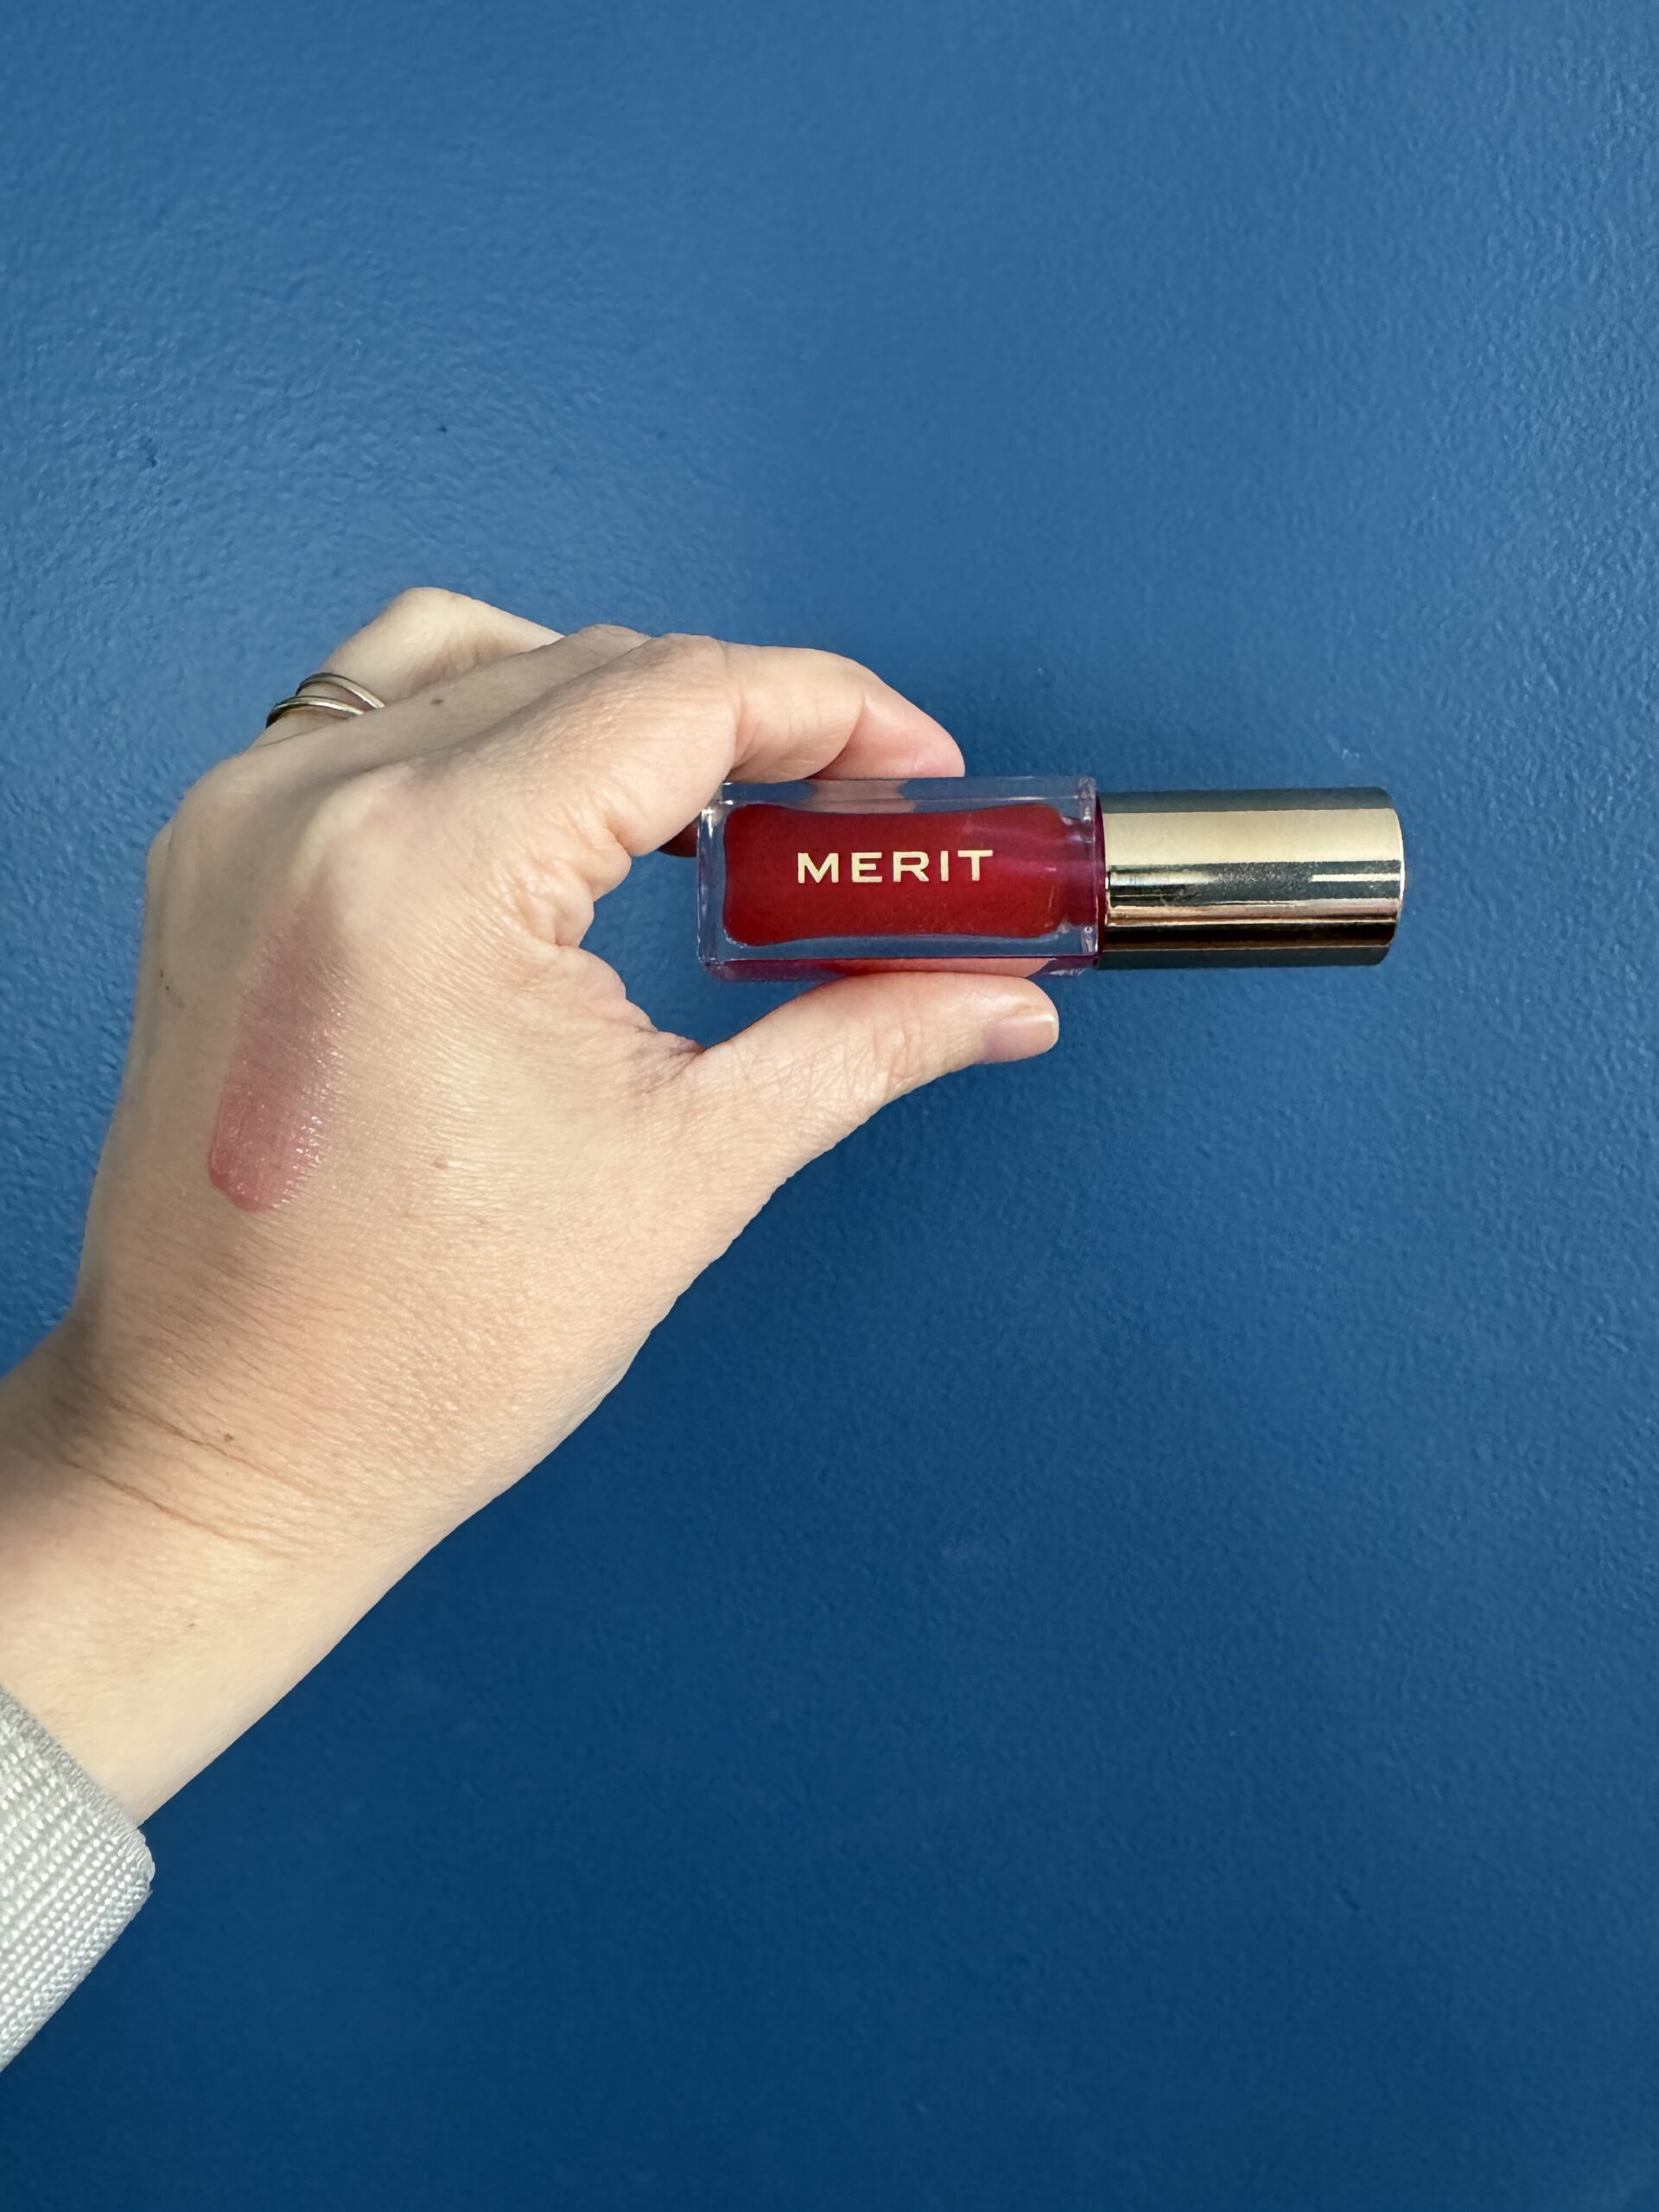 A person's hand against a blue background holding a tube of merit brand lip color with a swatch of the product on their wrist.